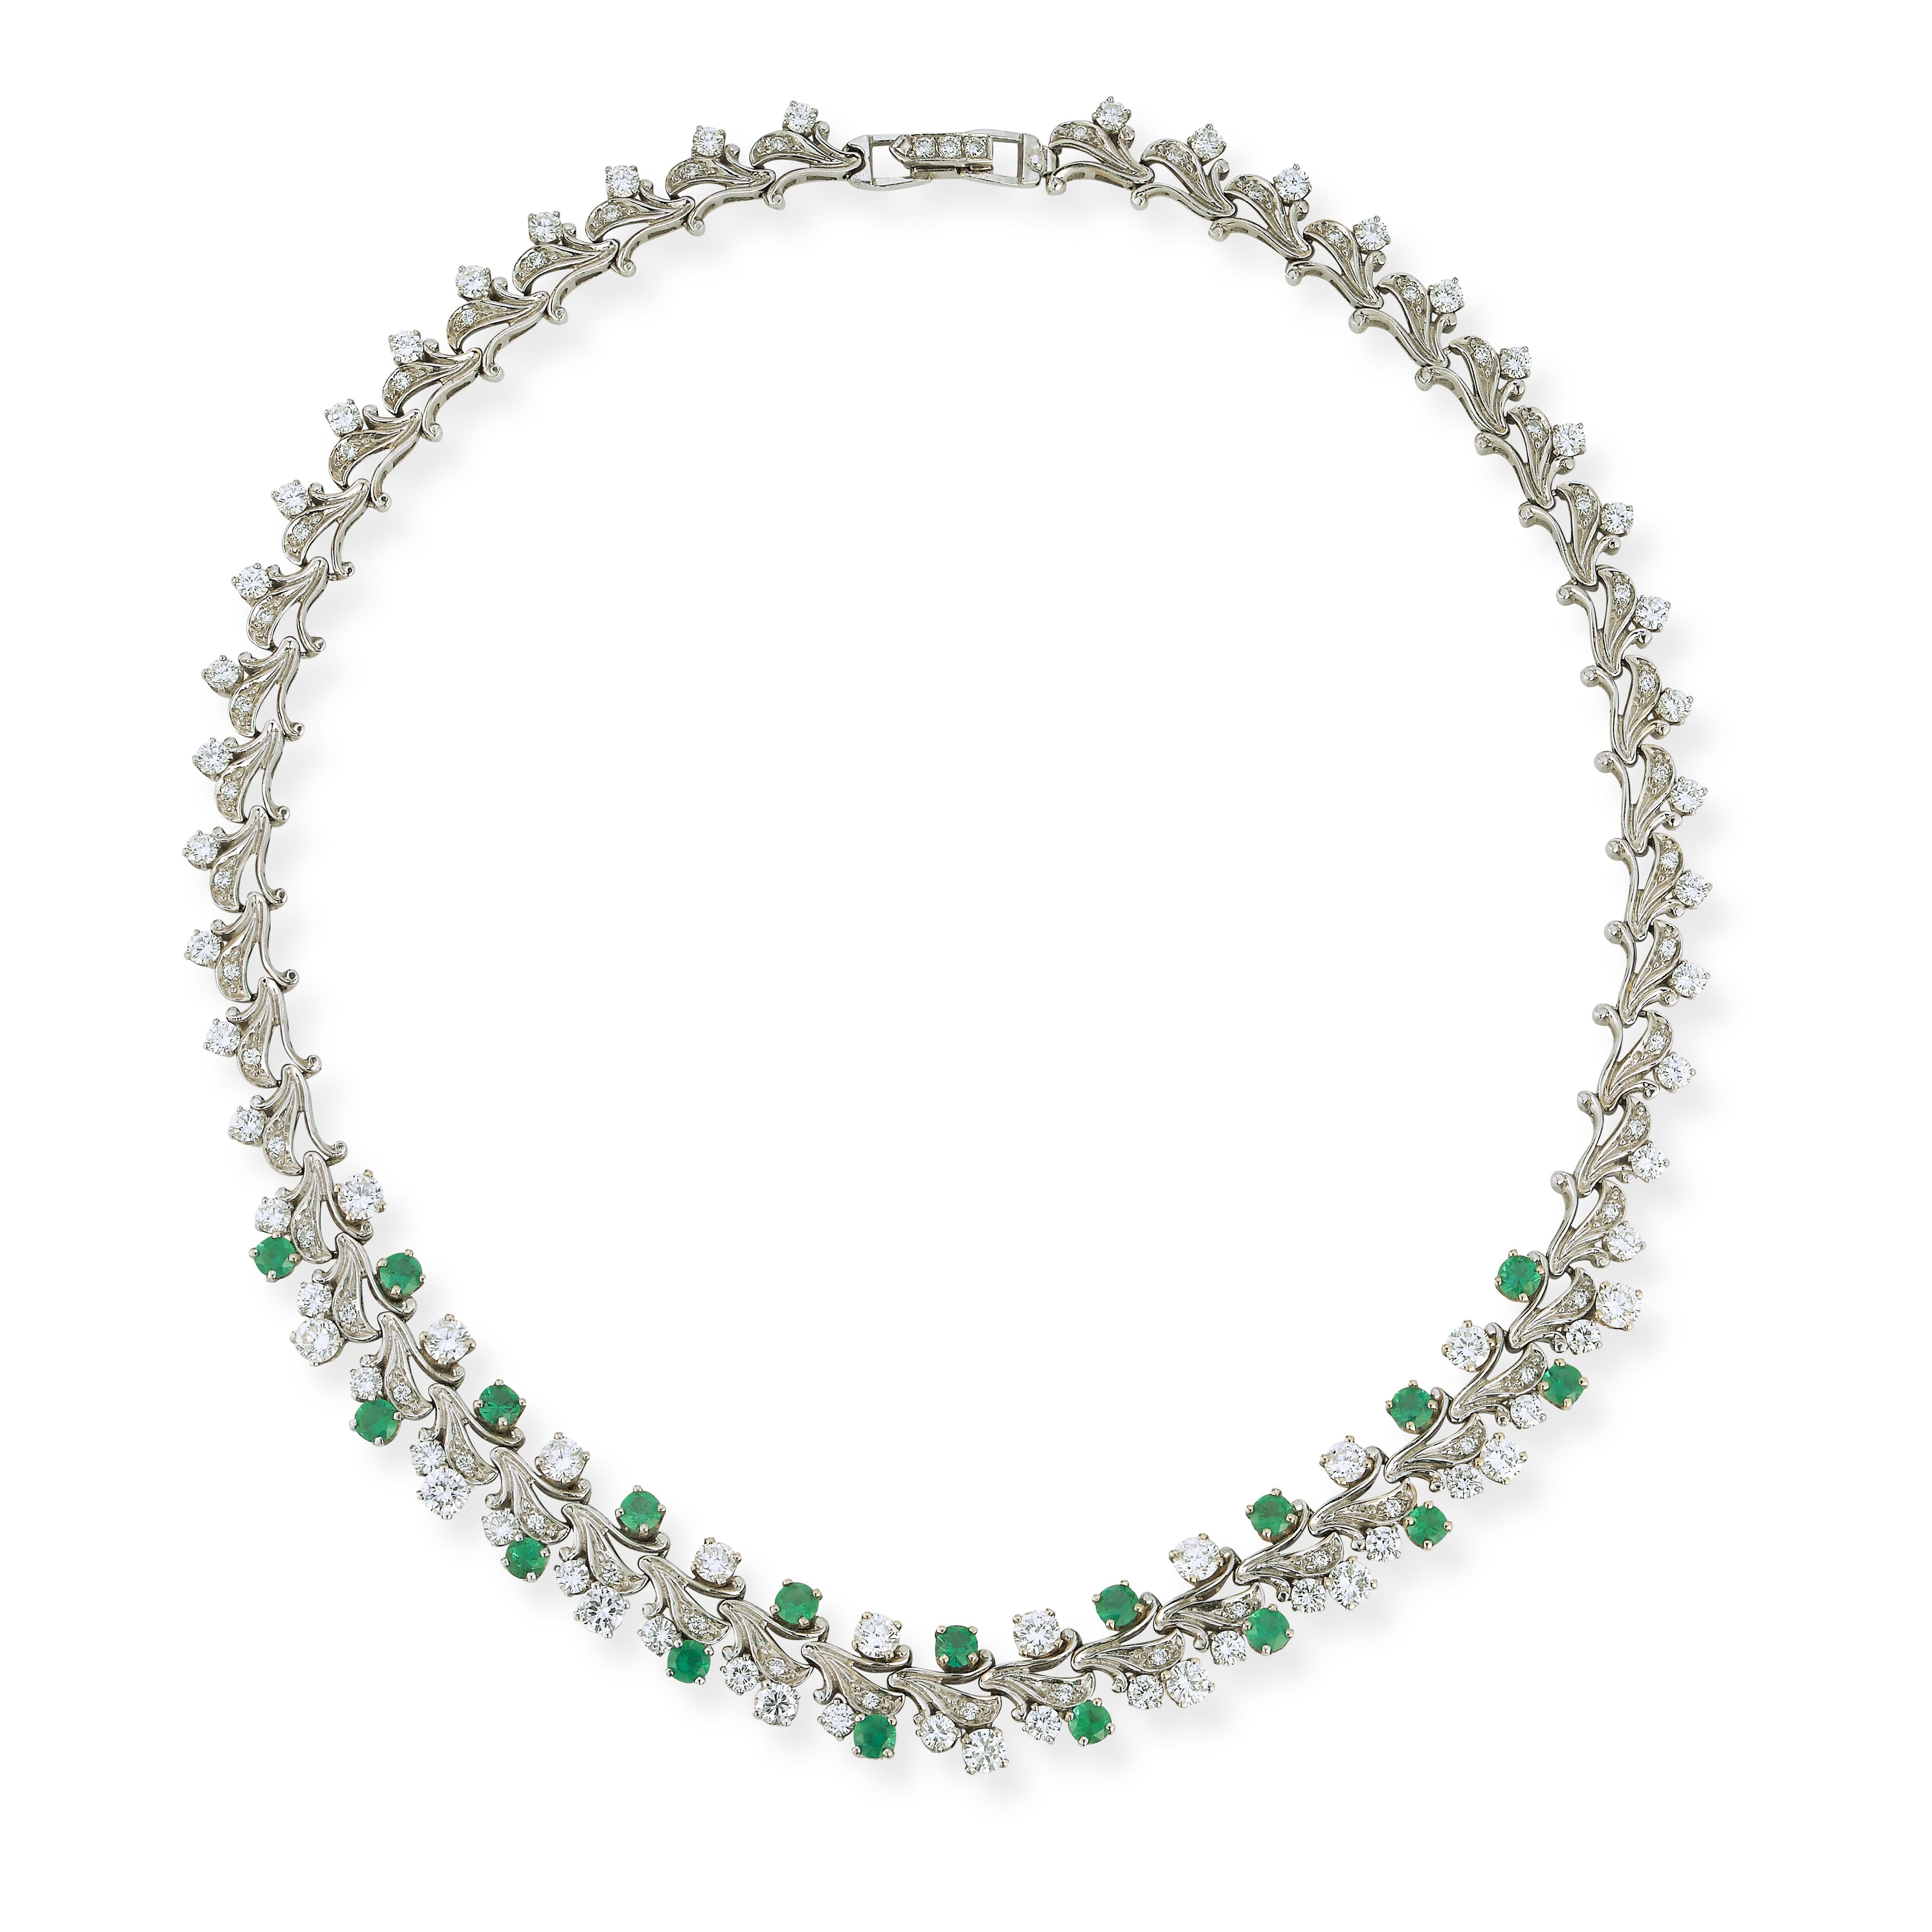 Two Row Diamond & Emerald Necklace,  a pattern of round cut diamonds & emeralds set in 14k white gold.

Measurements: 16